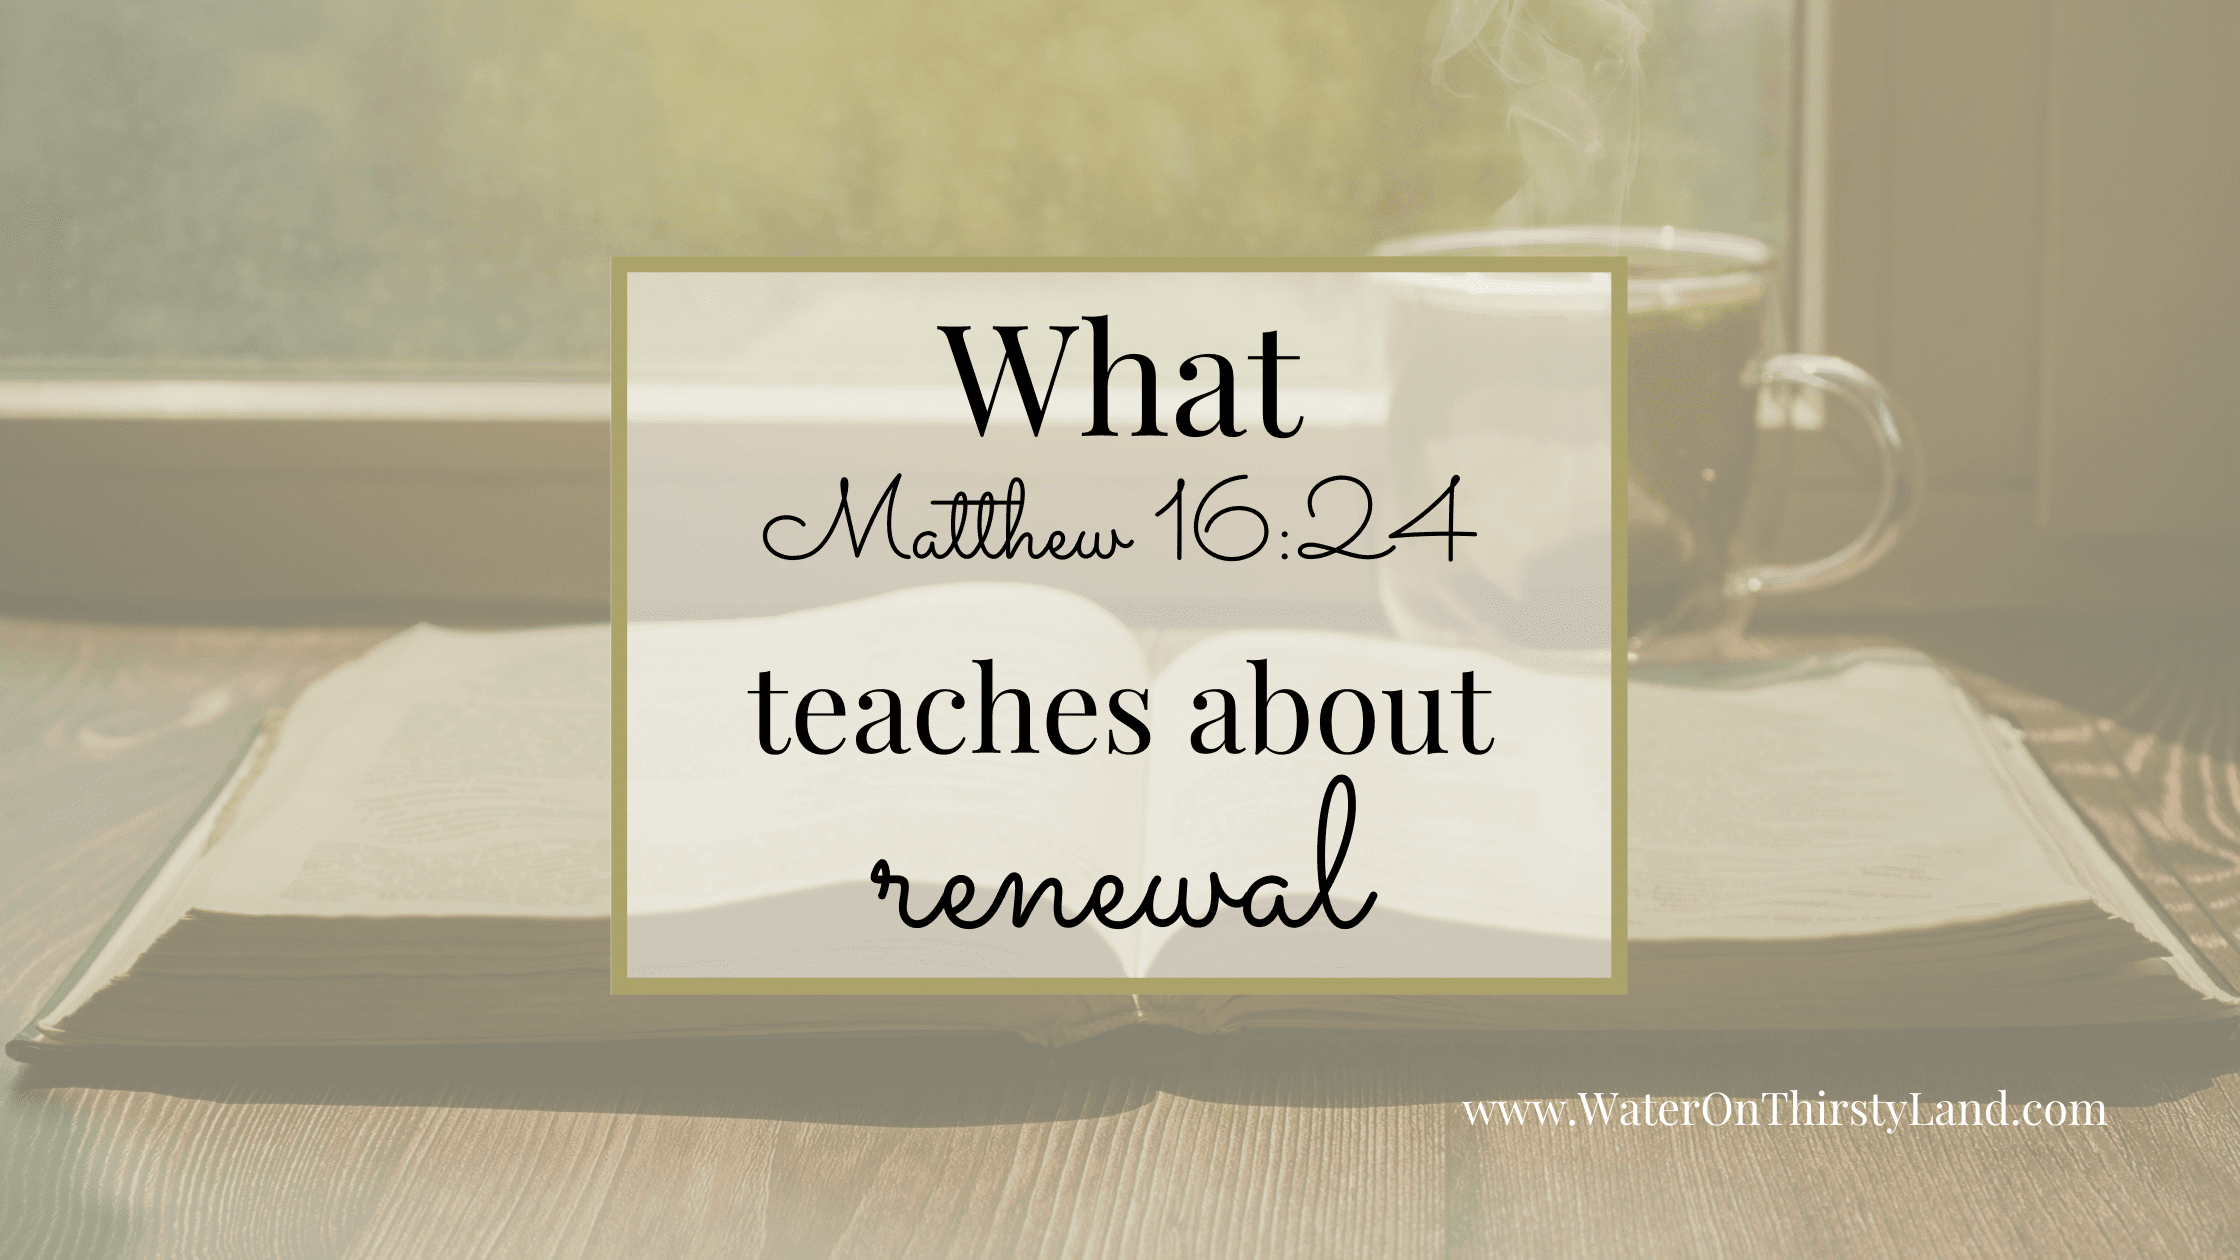 What Matthew 16:24 teaches about renewal